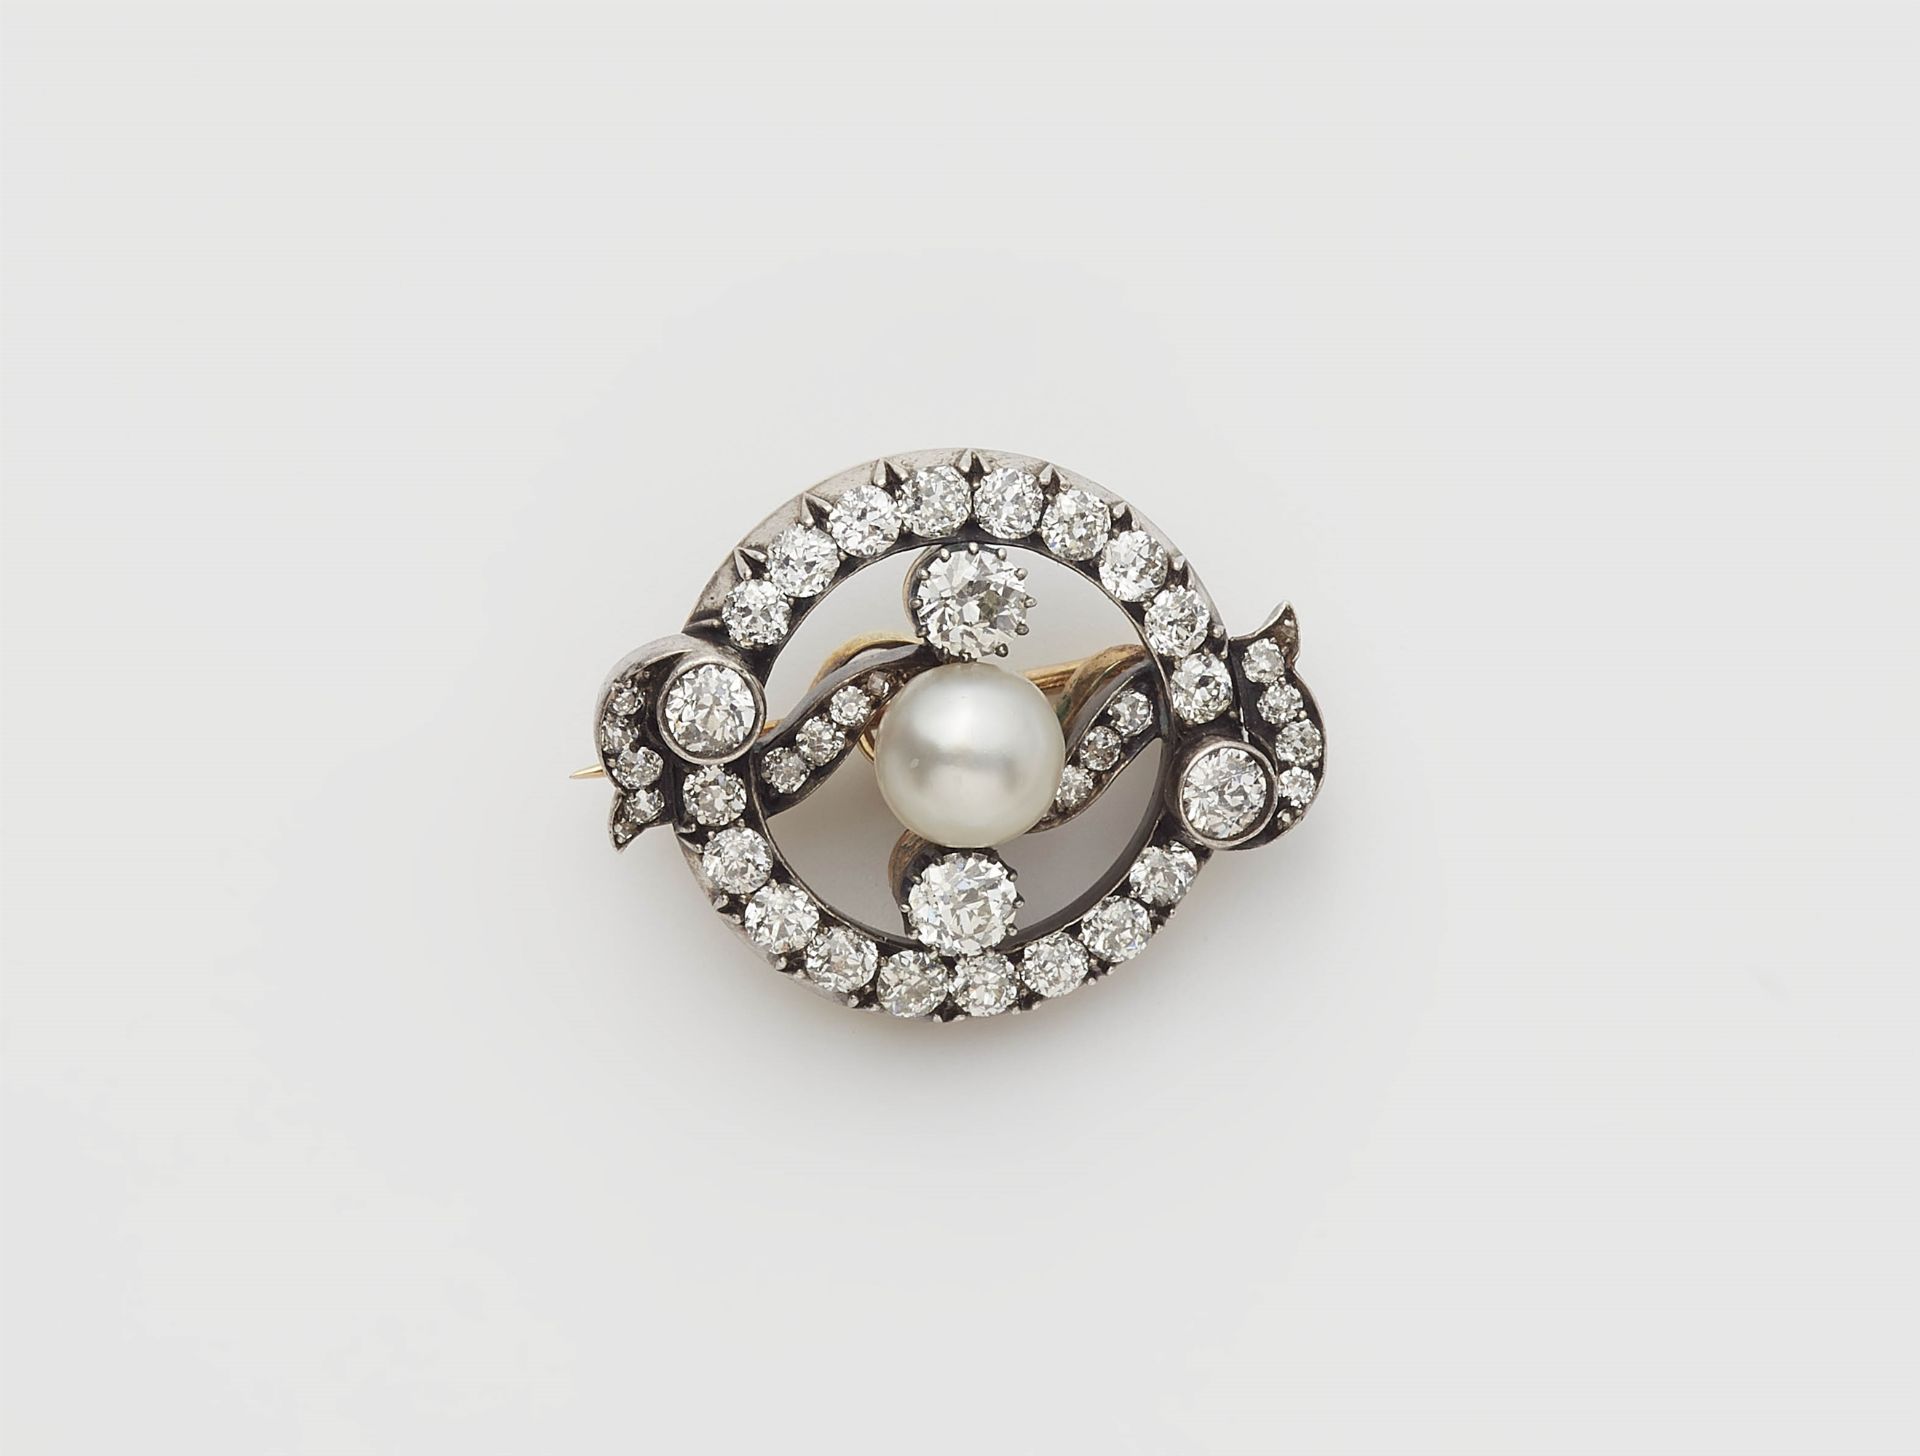 An Austrian 14k gold and European old-cut diamond brooch with a bouton pearl.